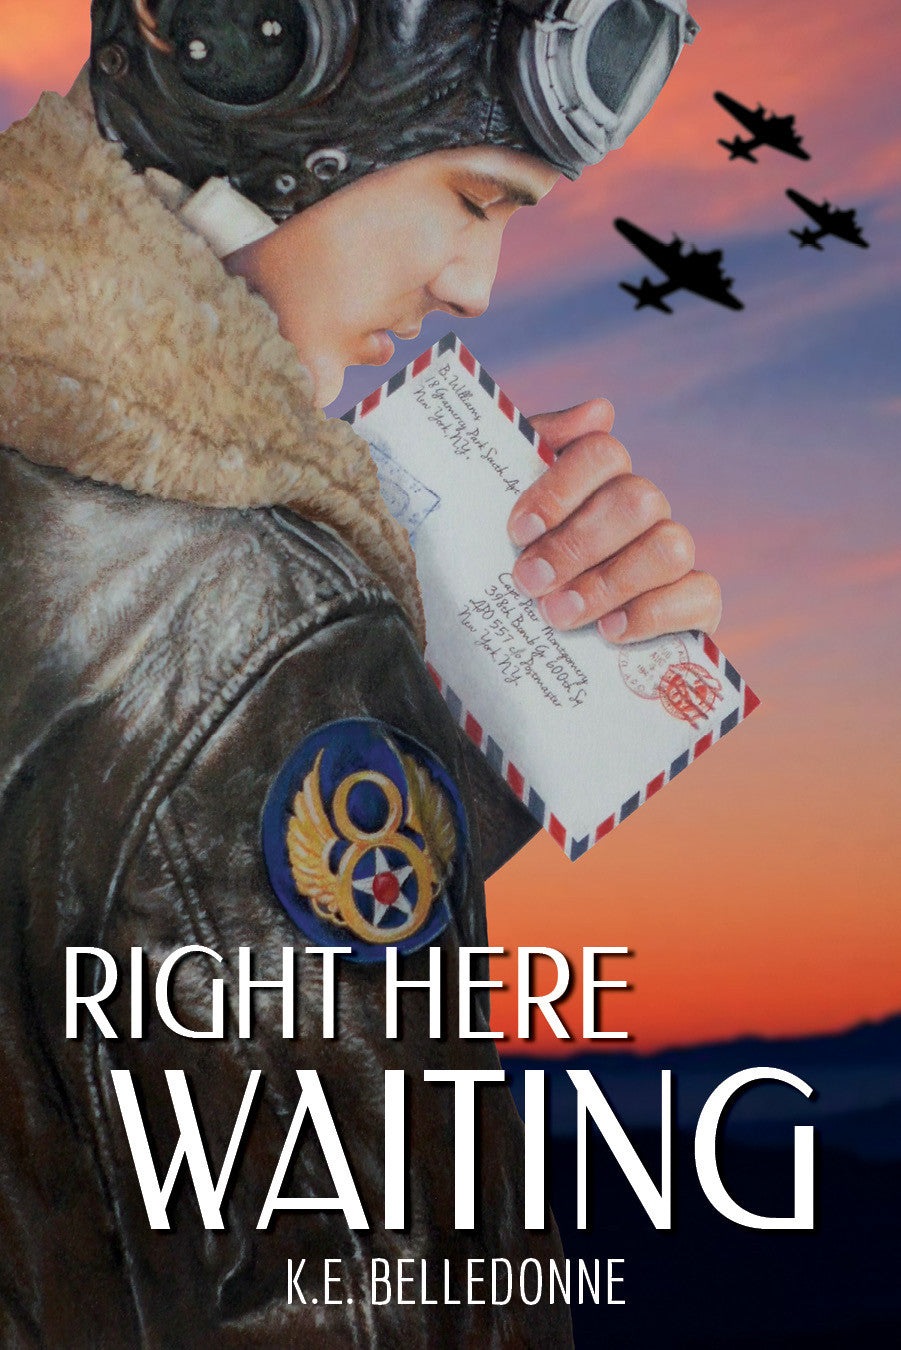 Right Here Waiting by K.E. Belledonne (ebook package)